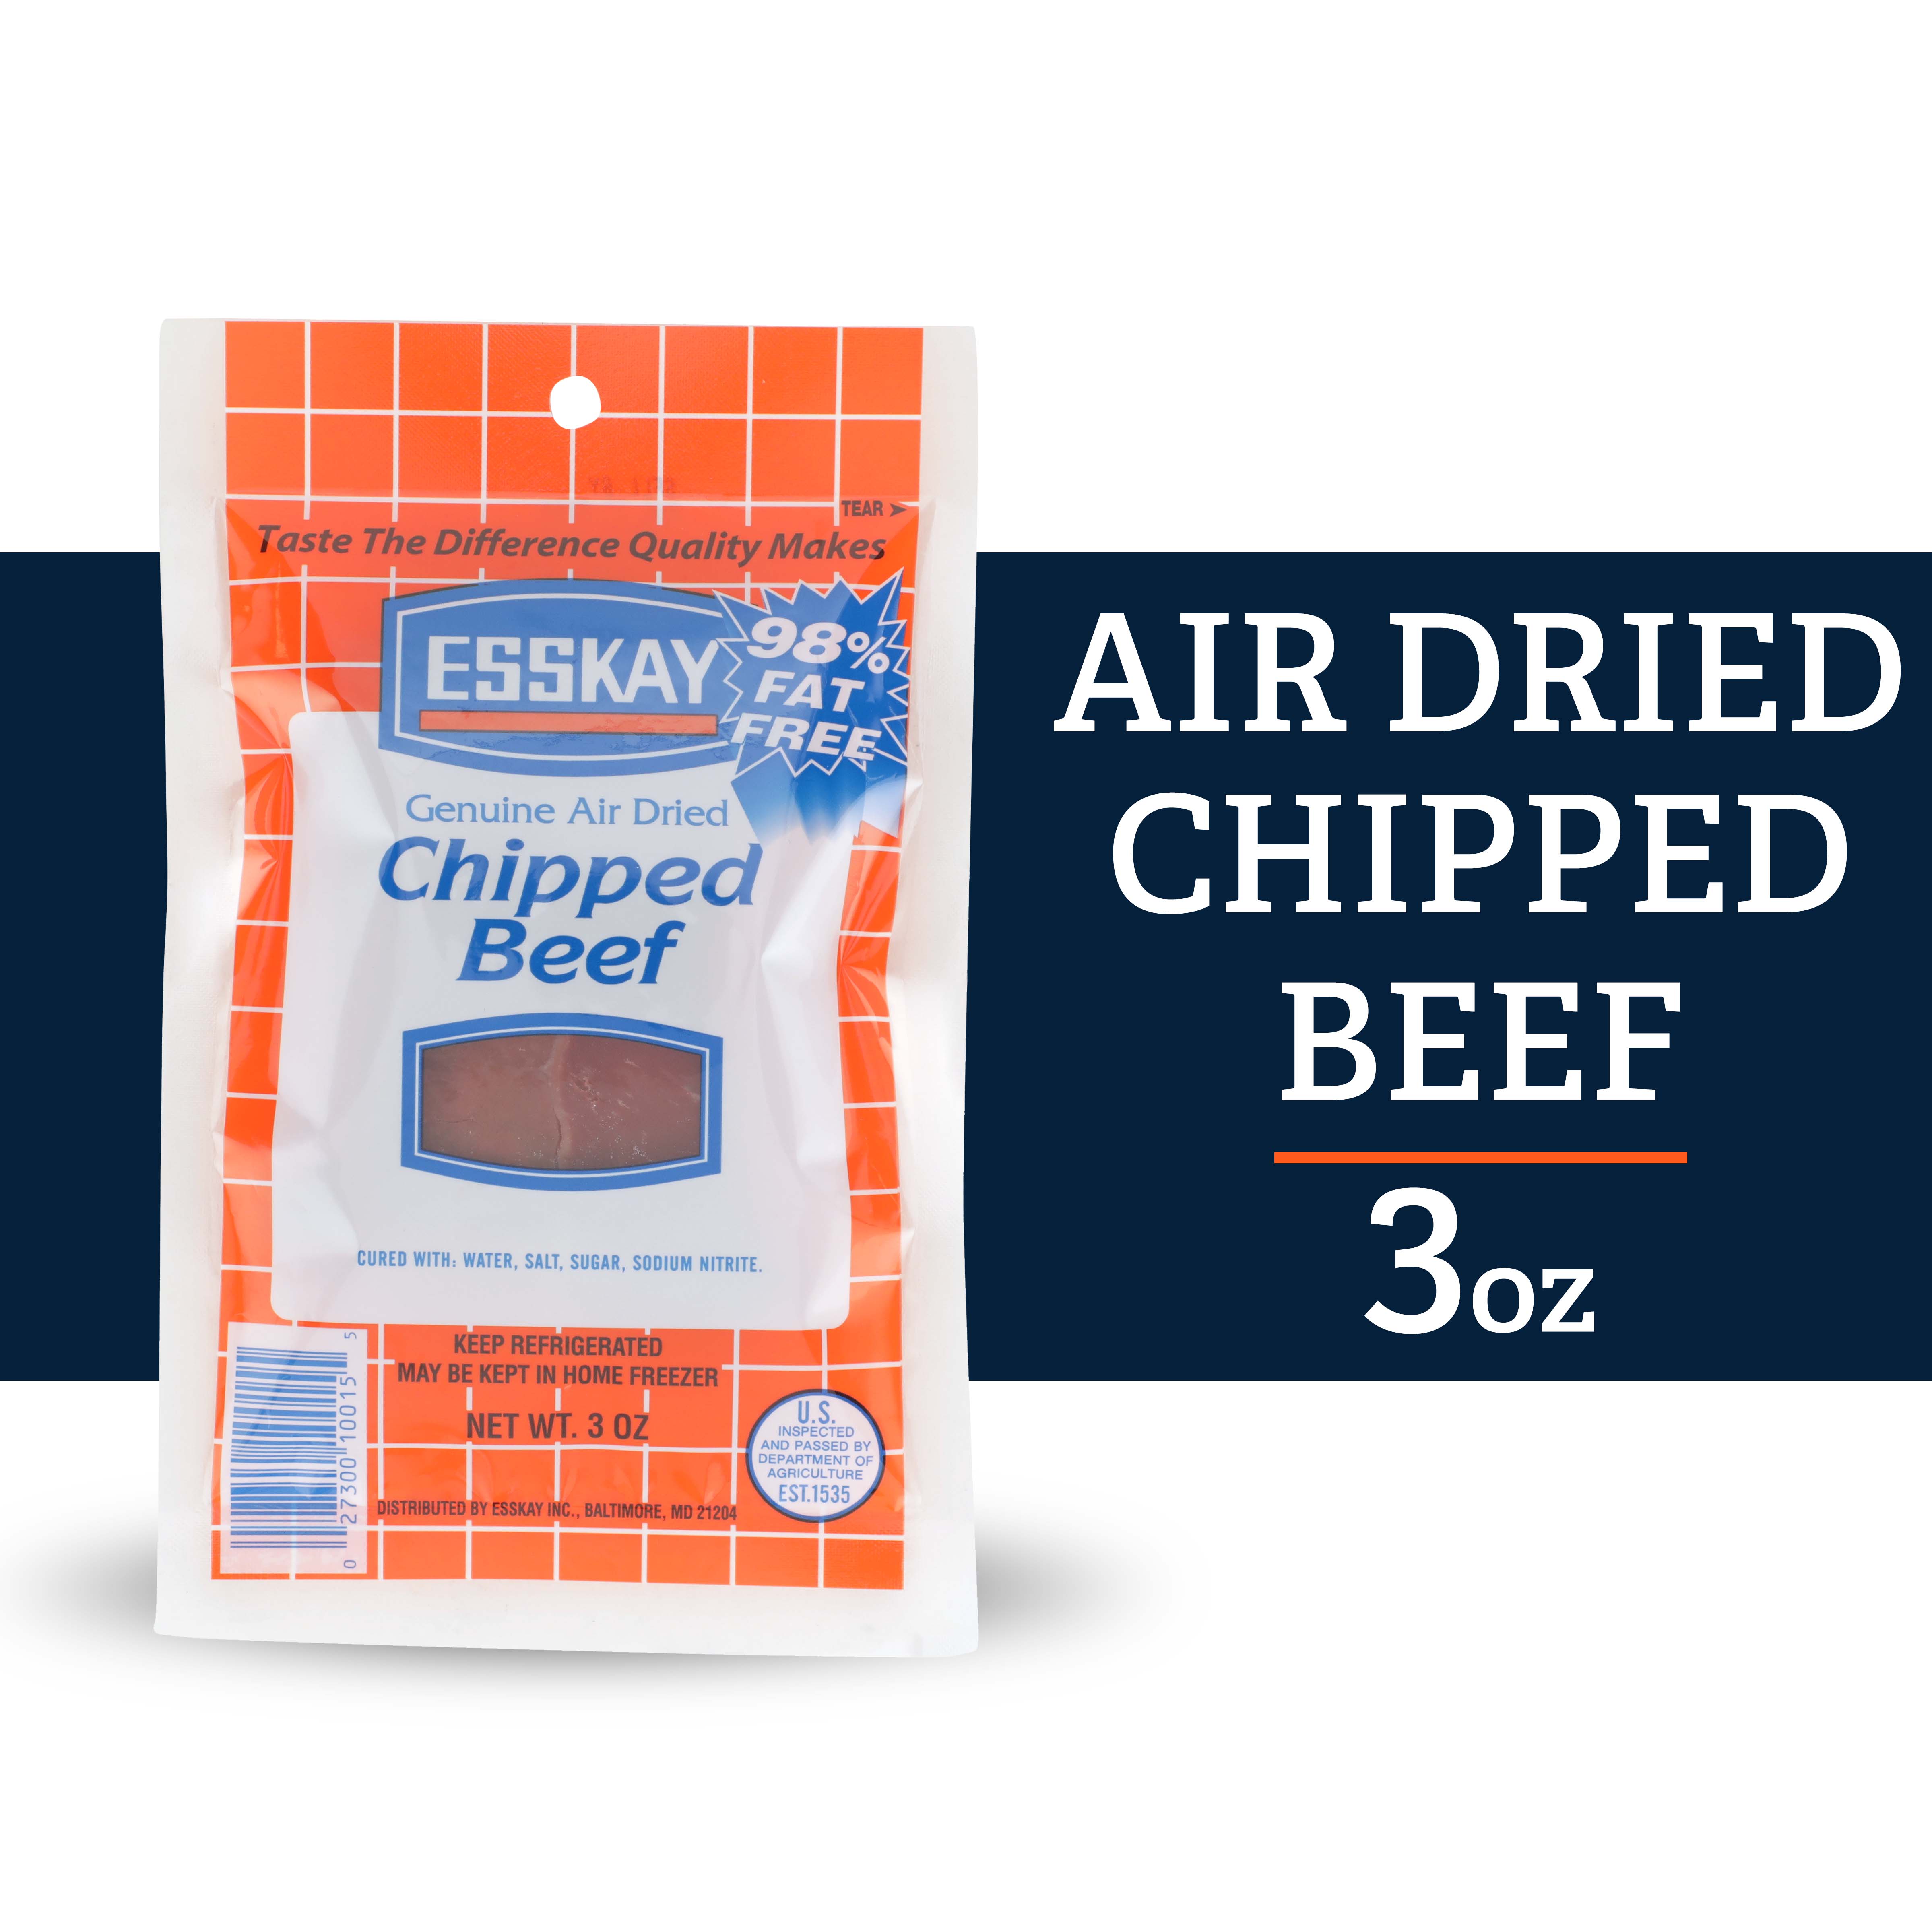 Esskay Air Dried Chipped Beef, 3 oz - image 1 of 7